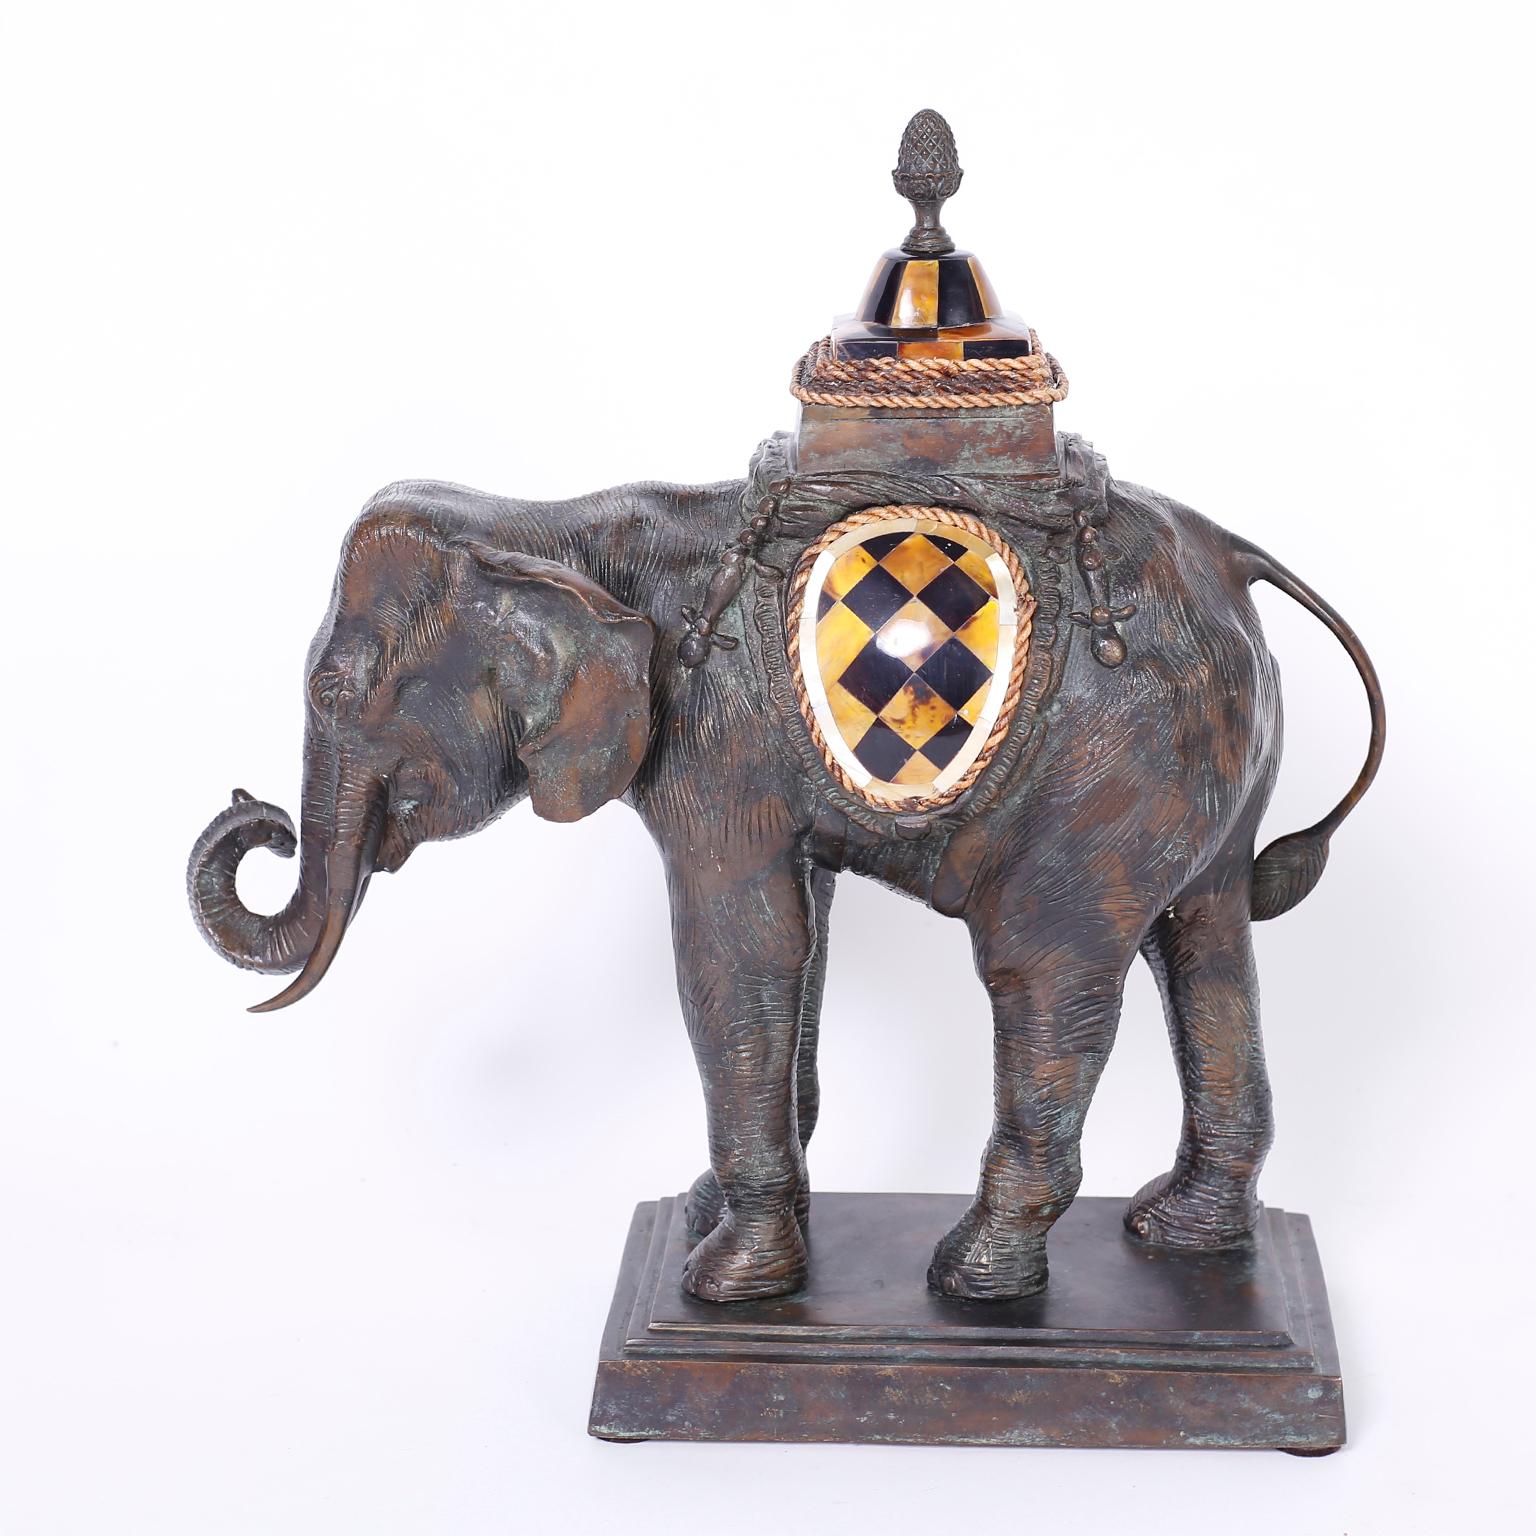 Decorative elephant sculpture or object of art crafted in bronze with a three tone patina, and decorated with panels of horn bordered with rope and topped with a pineapple finial. Signed Maitland-Smith on the bottom.